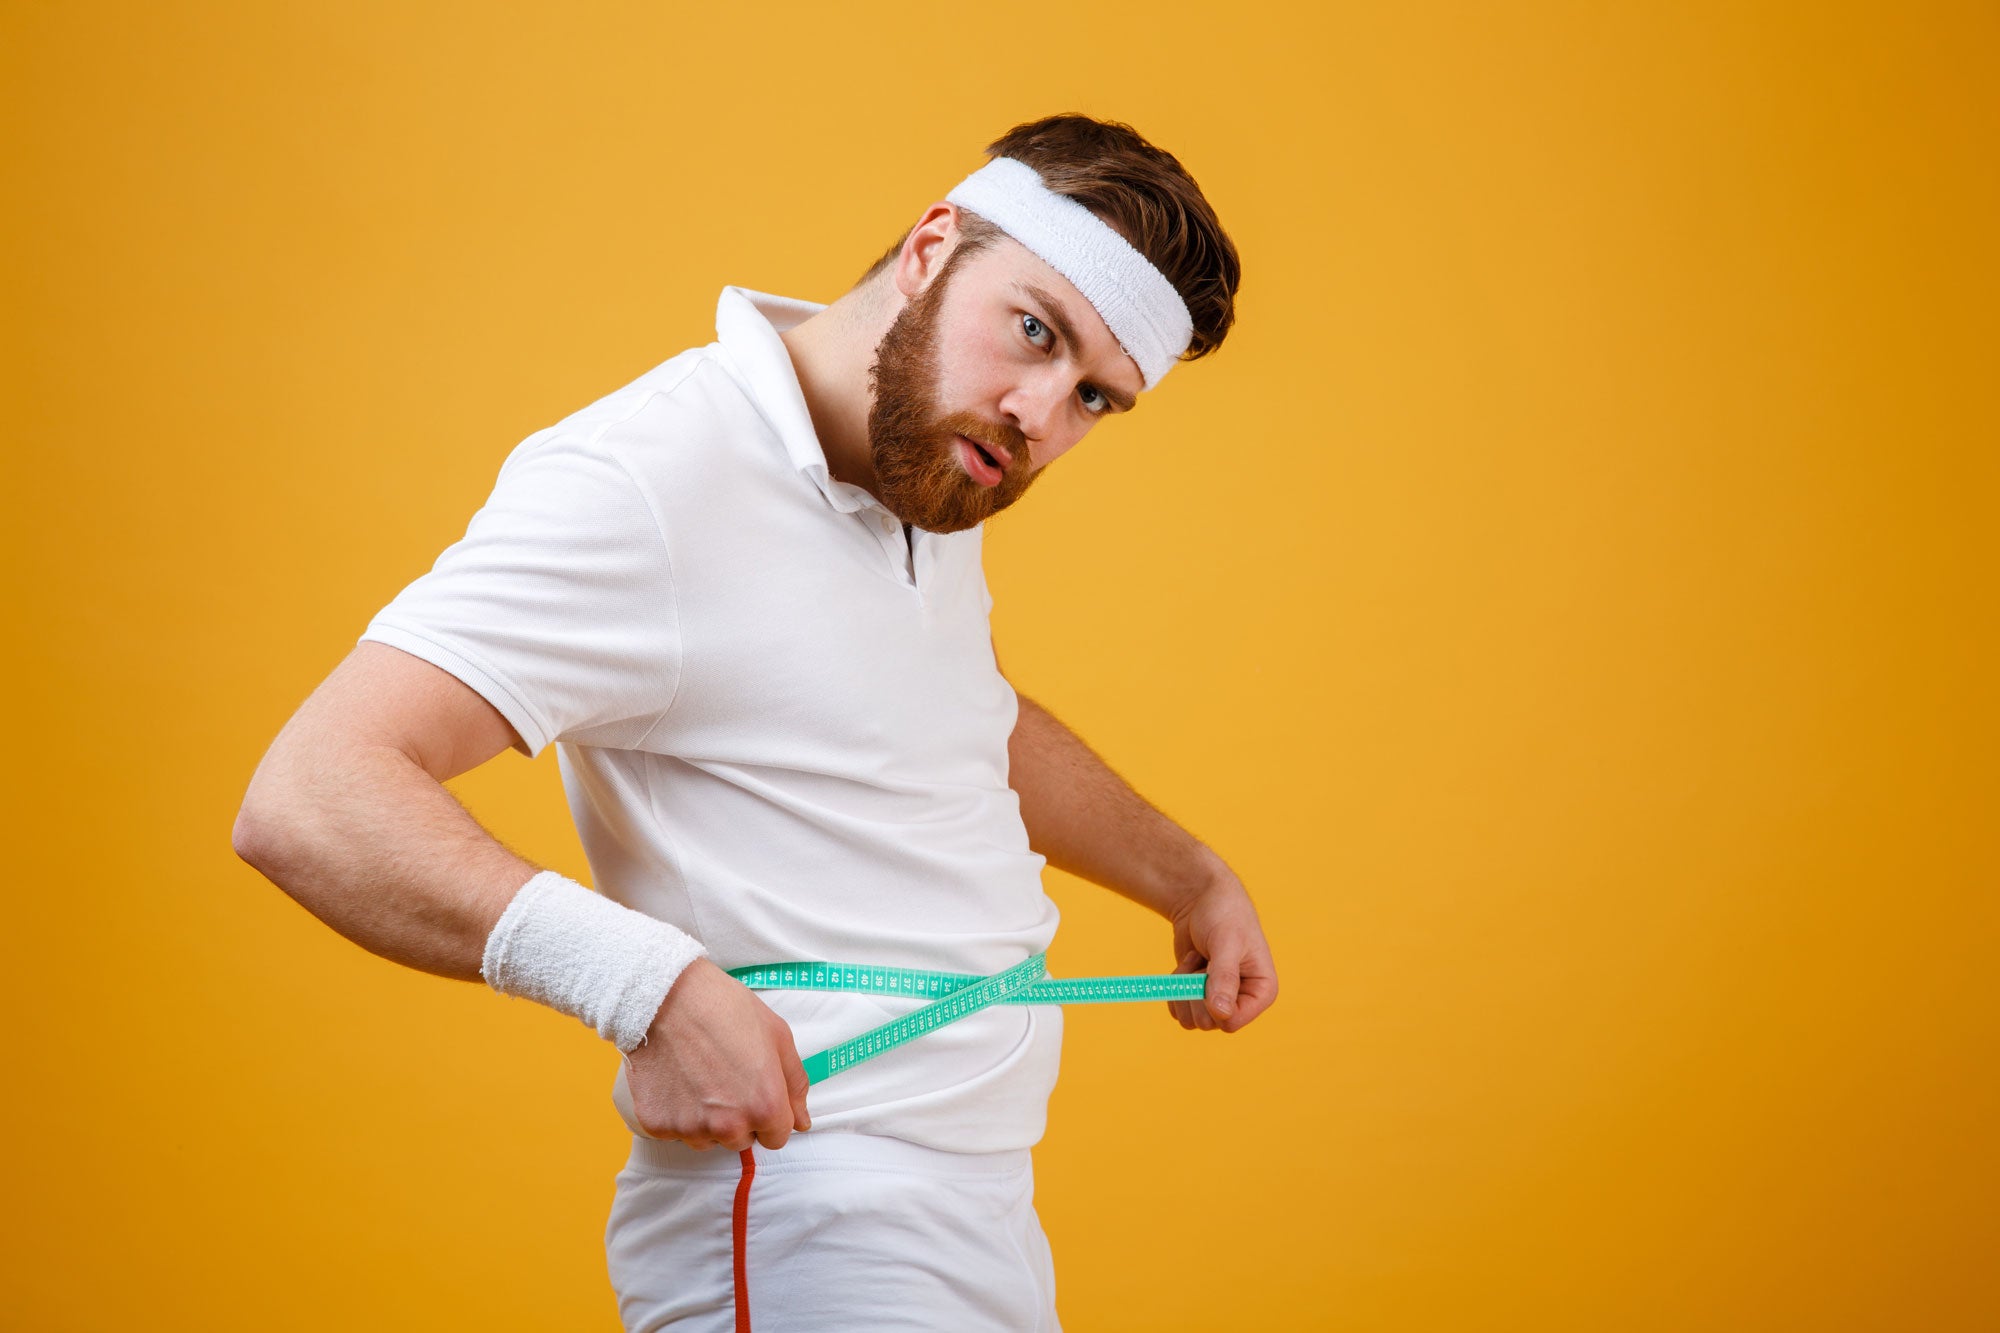 Image of a man in a white tennis wear holding a measuring tape around his waist. He is standing against a yellow wall.